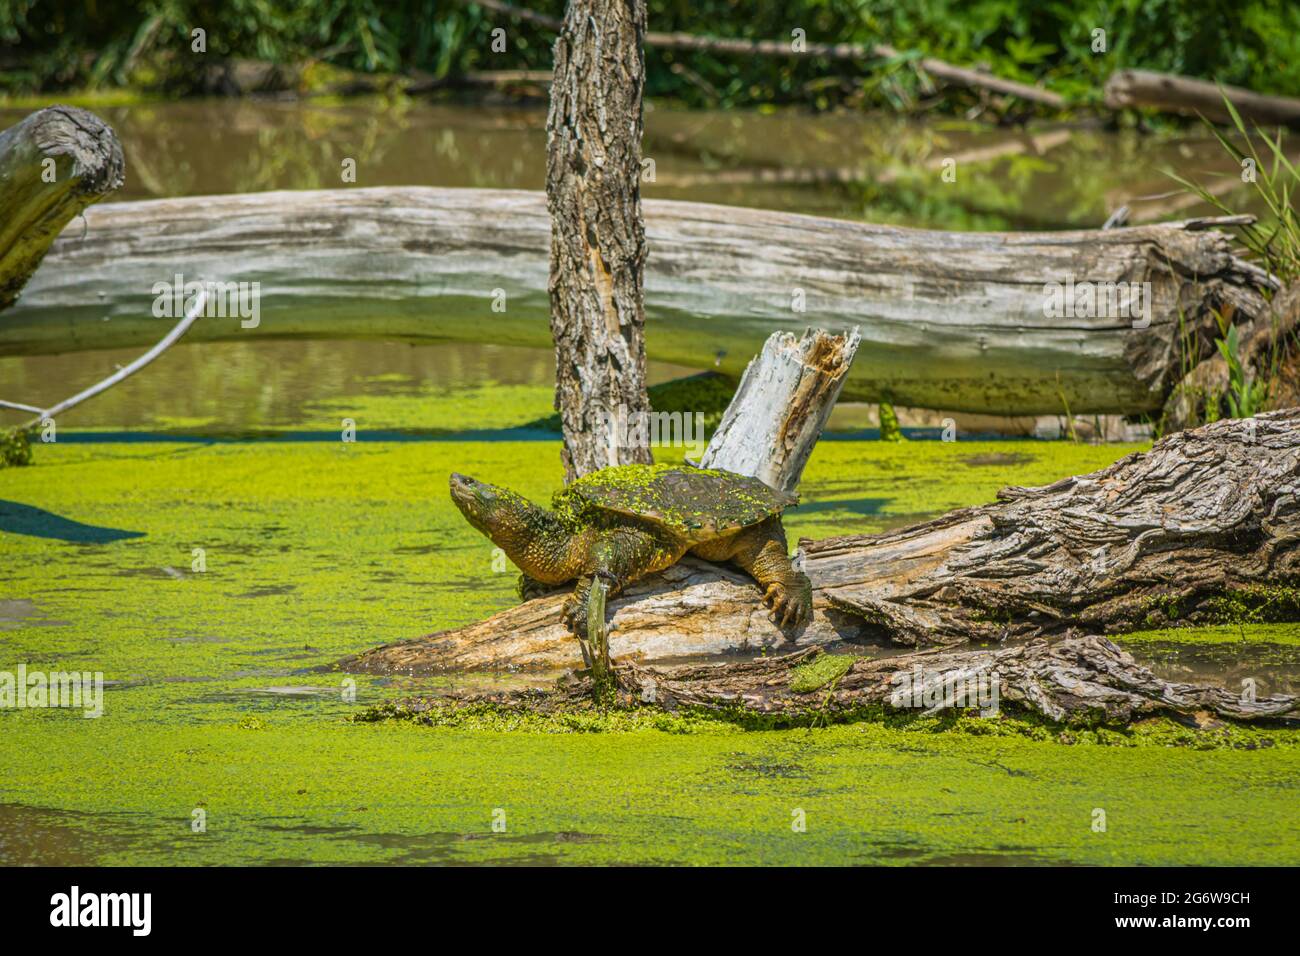 Common Snapping Turtle habitat (Testudo serpentine) basking on partially submerged cottonwood tree trunk in wetlands area, Castle Rock Colorado USA. Stock Photo